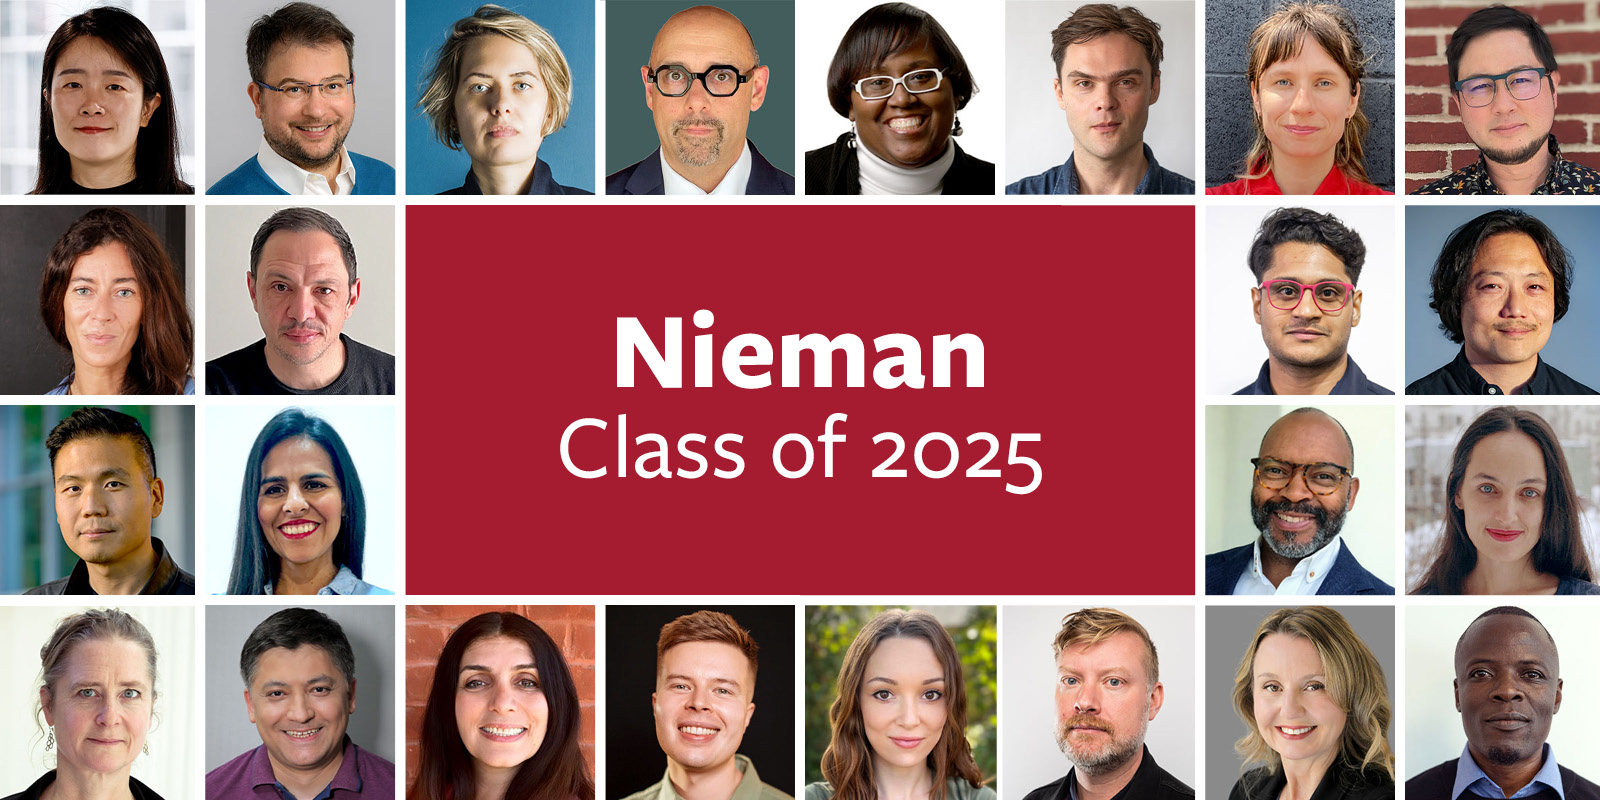 Preview Image for Introducing the Nieman Class of 2025